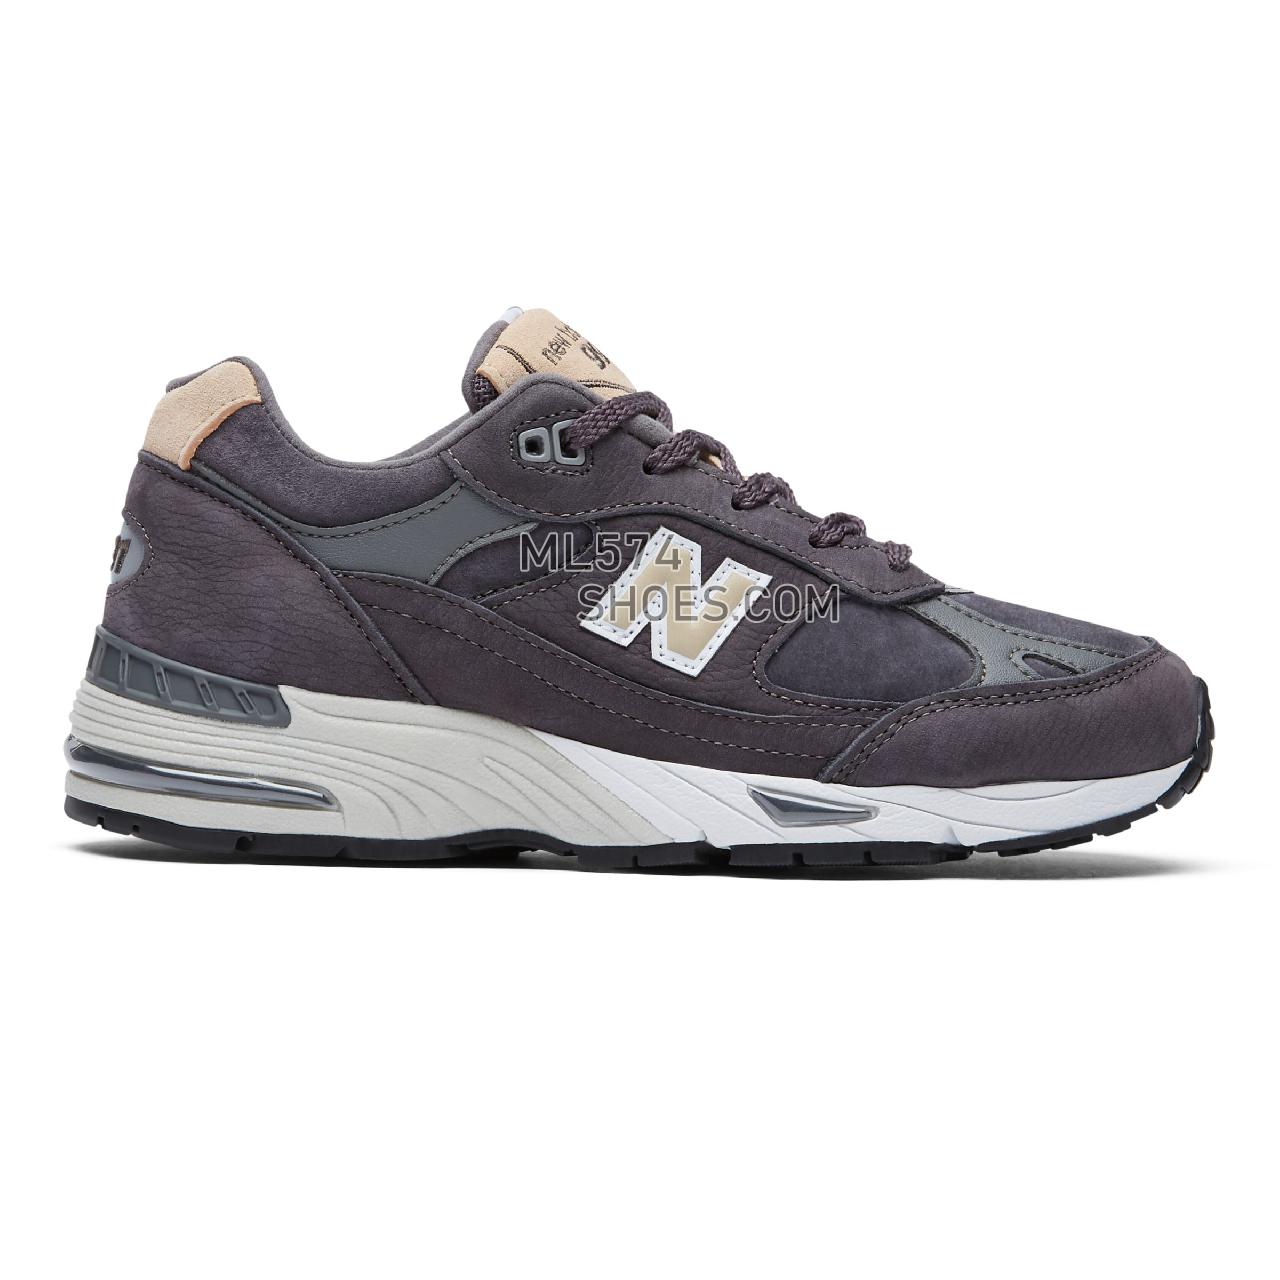 New Balance Made in UK 991 - Men's Made in UK 991 WL991V1-27420-W - Dark Grey with Sand and White - W991DGS